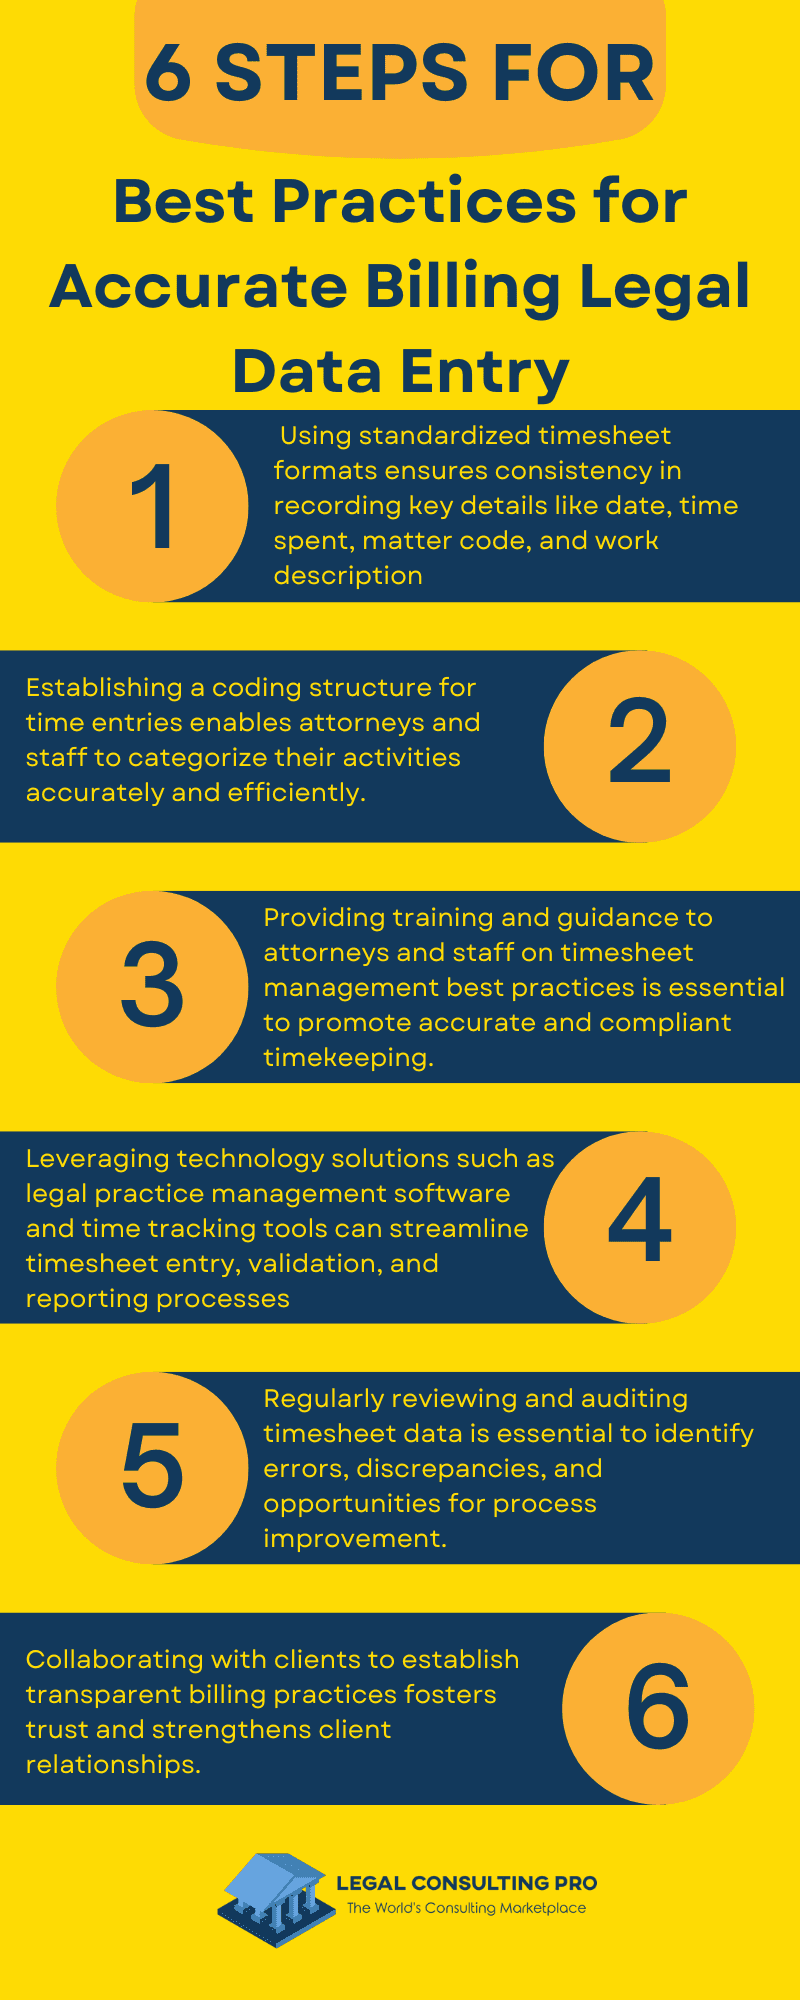 Best Practices for Accurate Billing Legal Data Entry Infographic